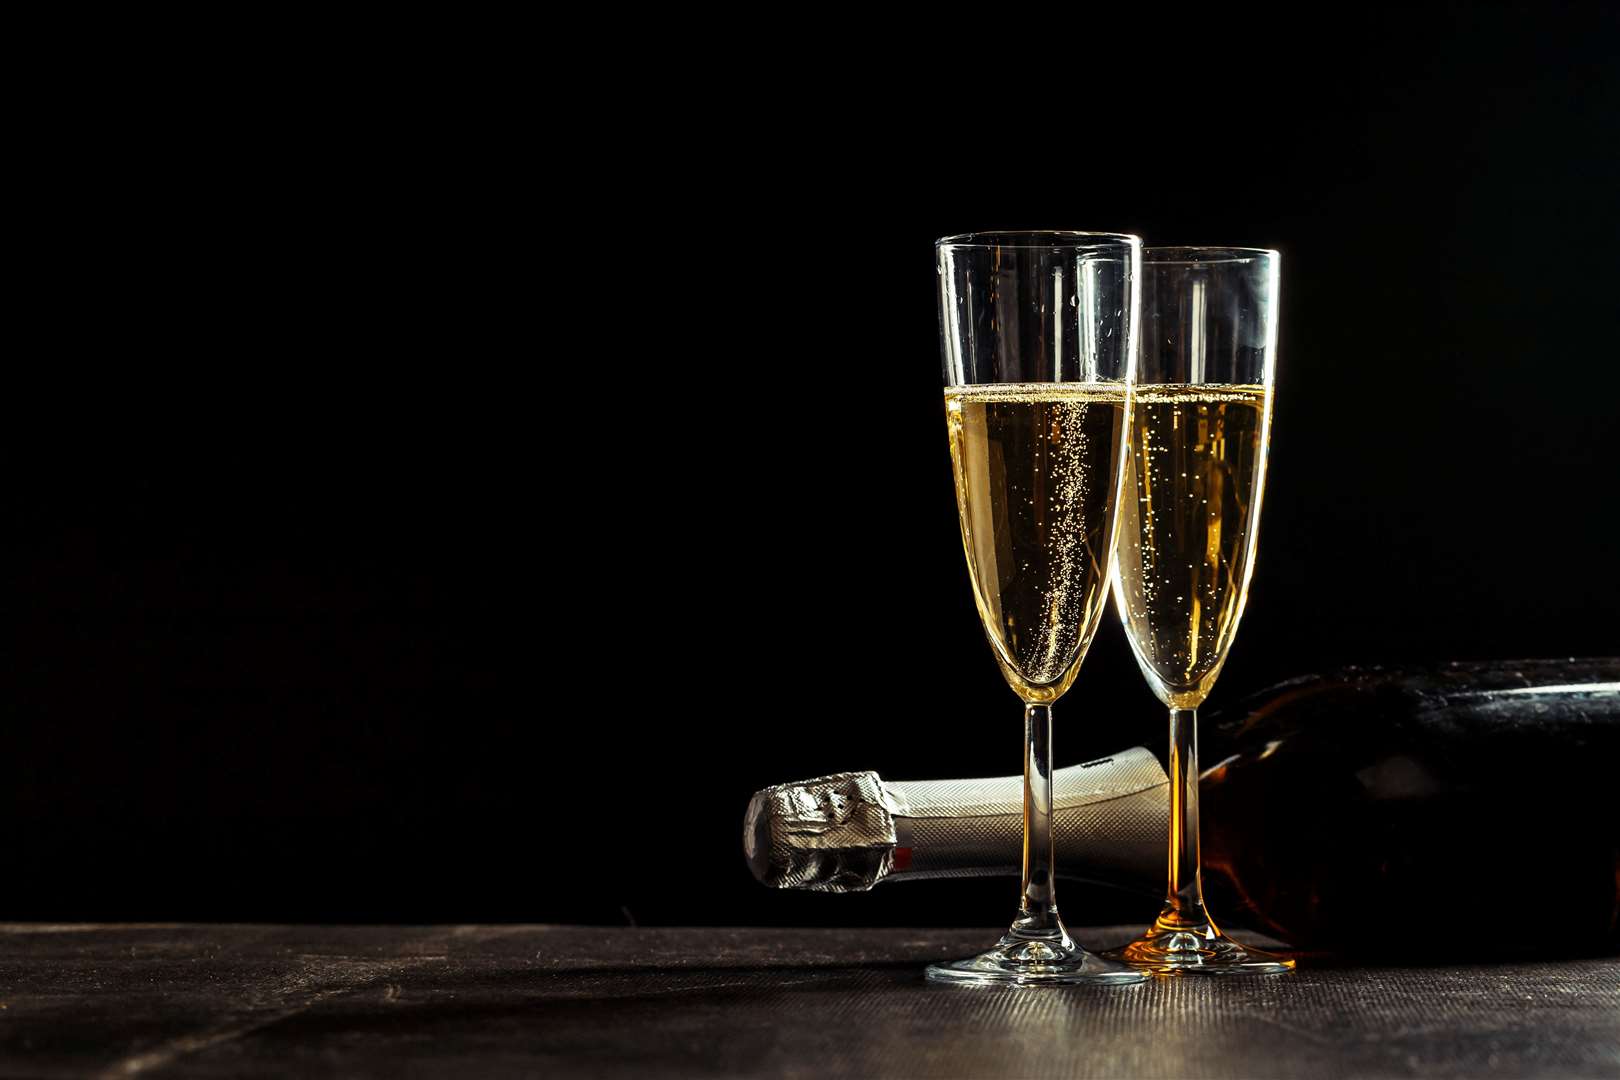 Bottle of champagne and glasses over dark background